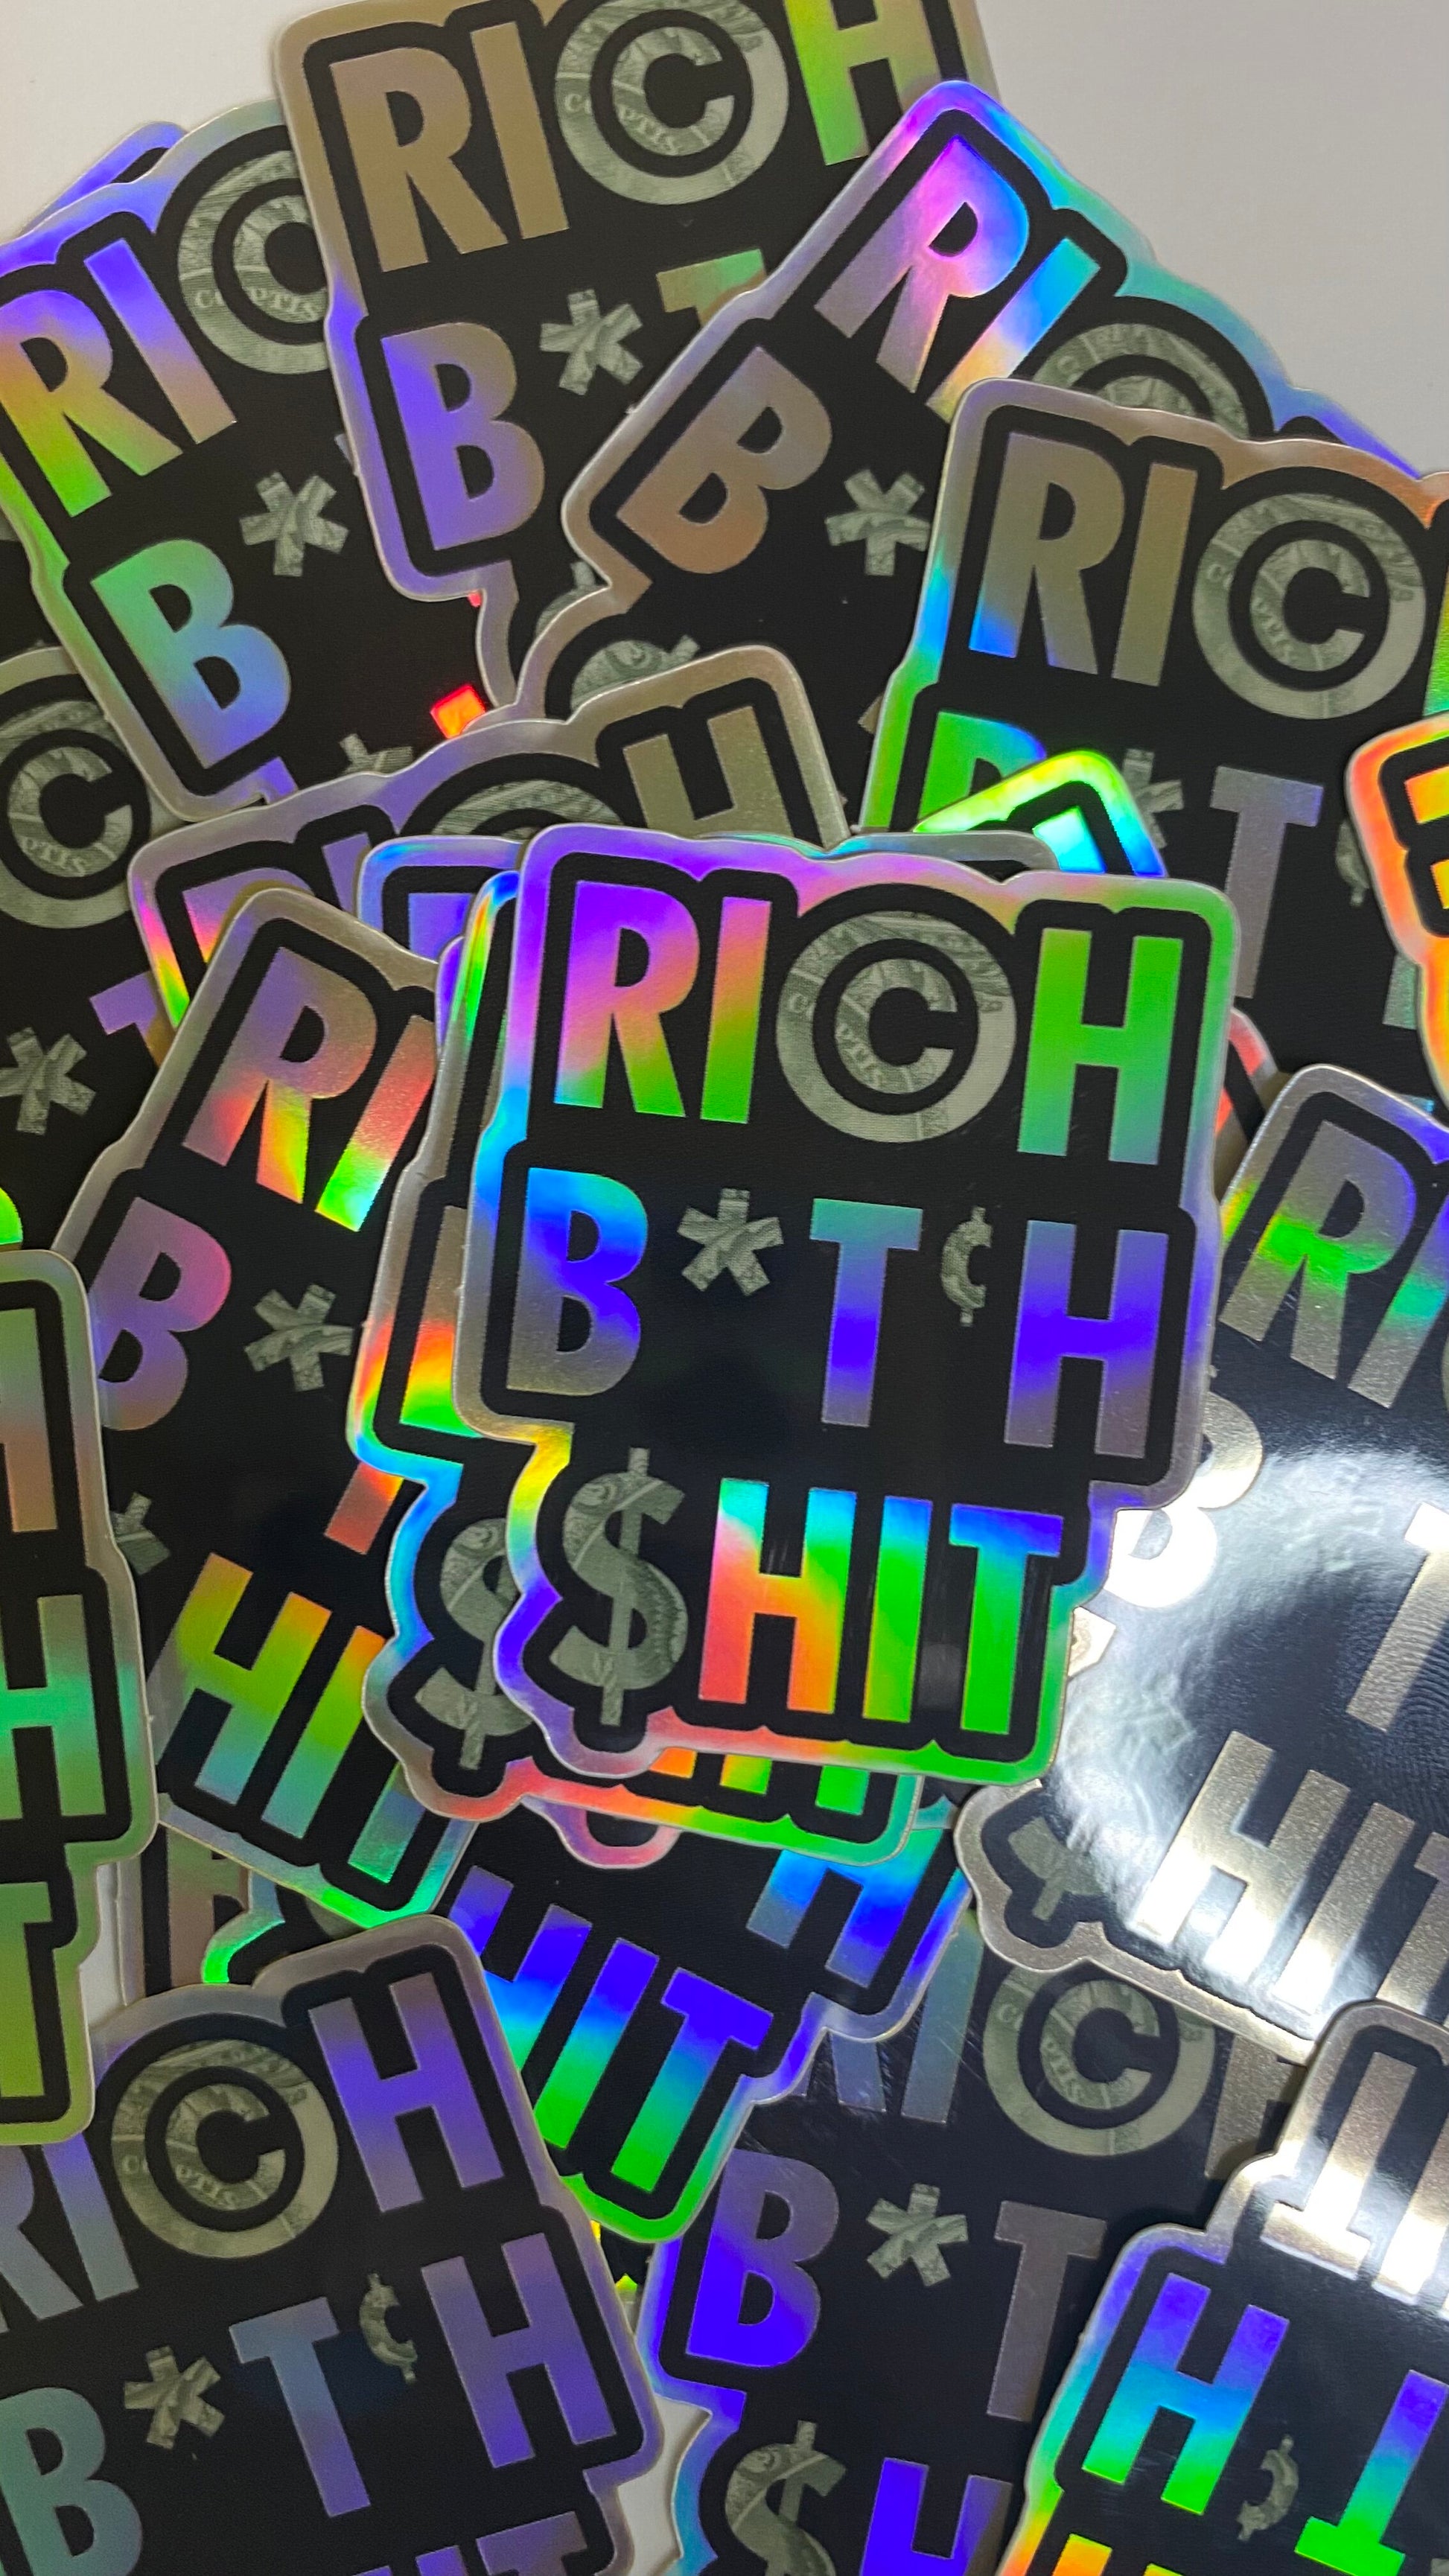 Rich B*tch Sh*t holographic high quality vinyl waterproof and scratch resistant sticker from Goods Made By Digitrillnana. Perfect for laptops, water bottles, phone cases, luggage, journals, and more! Black Woman Owned.